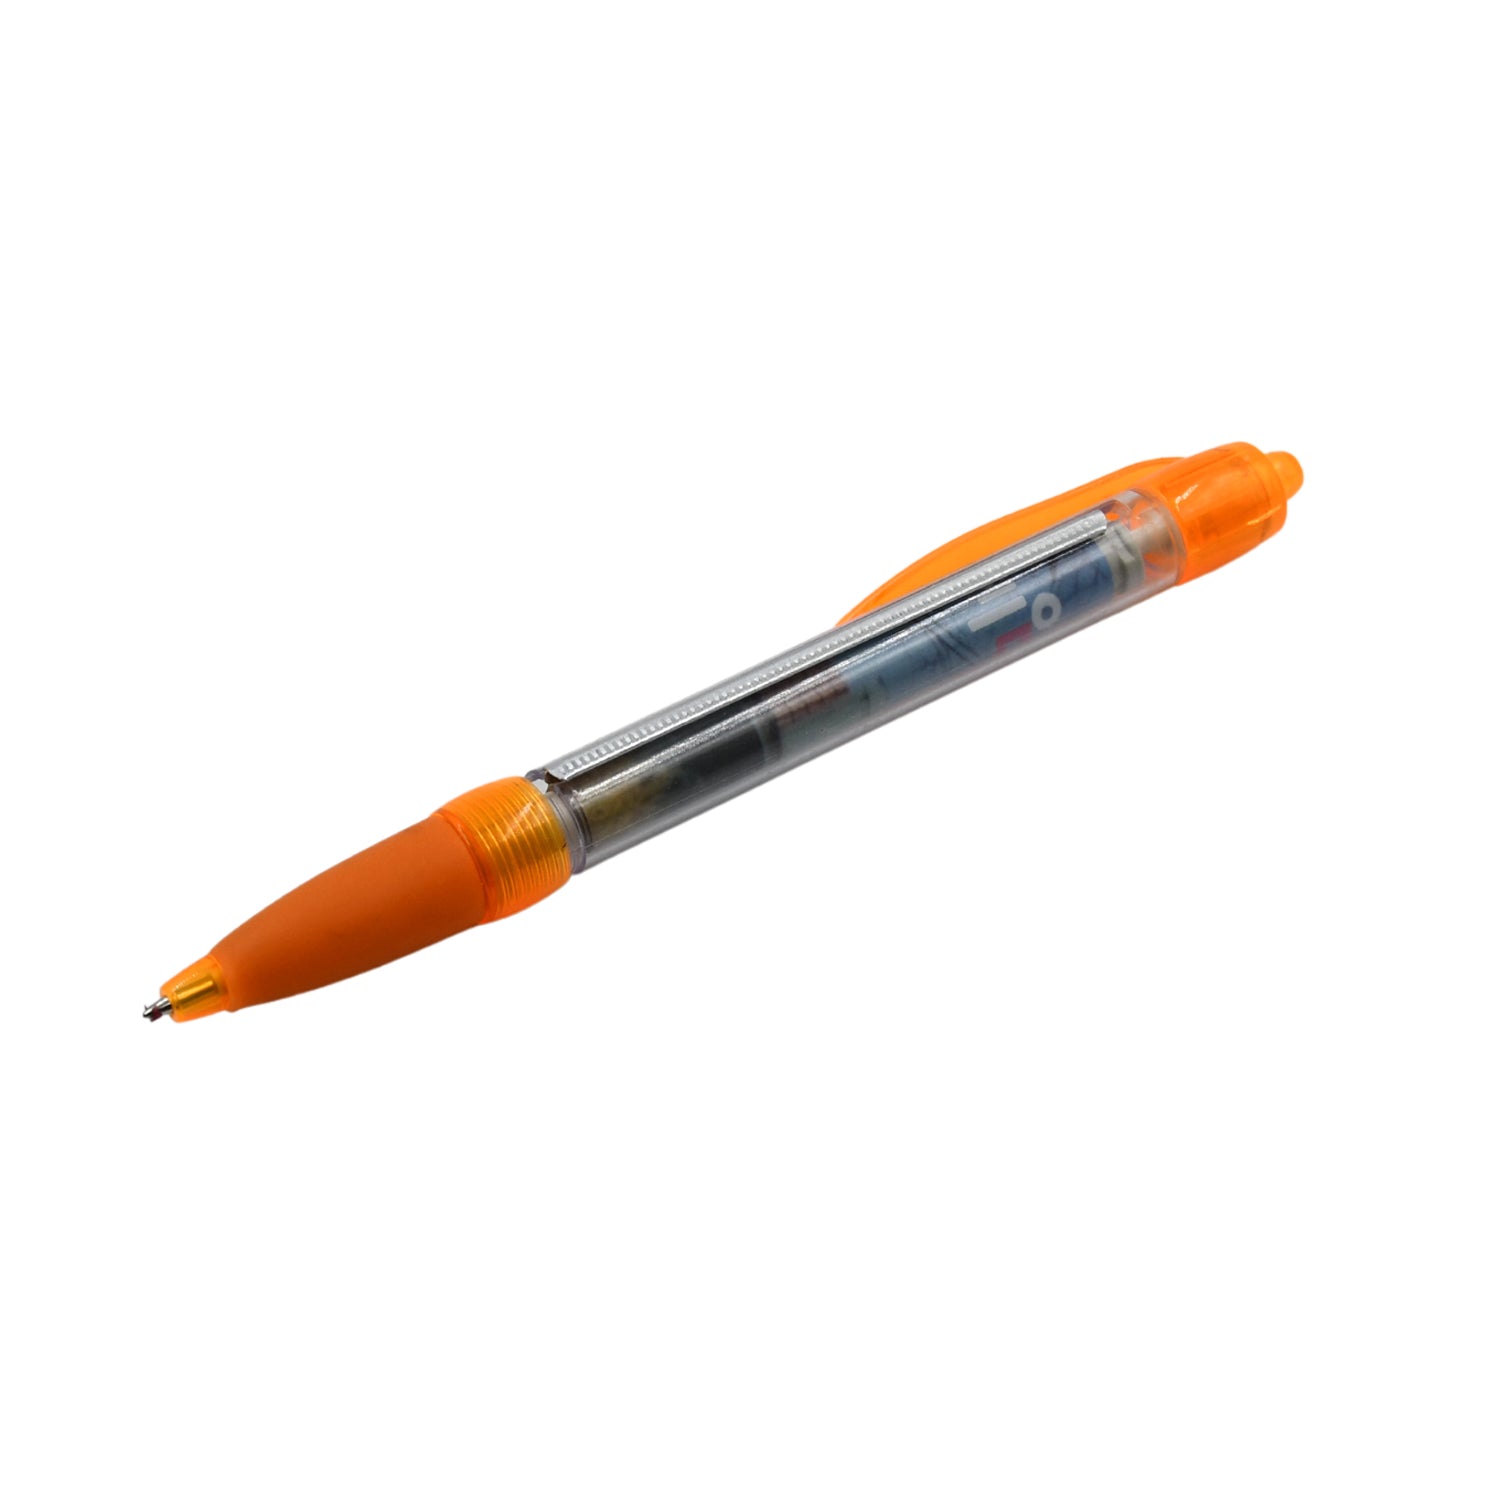 Smooth Writing Pen Superior Writing Experience Professional Sturdy Ball Pen For School And Office Stationery